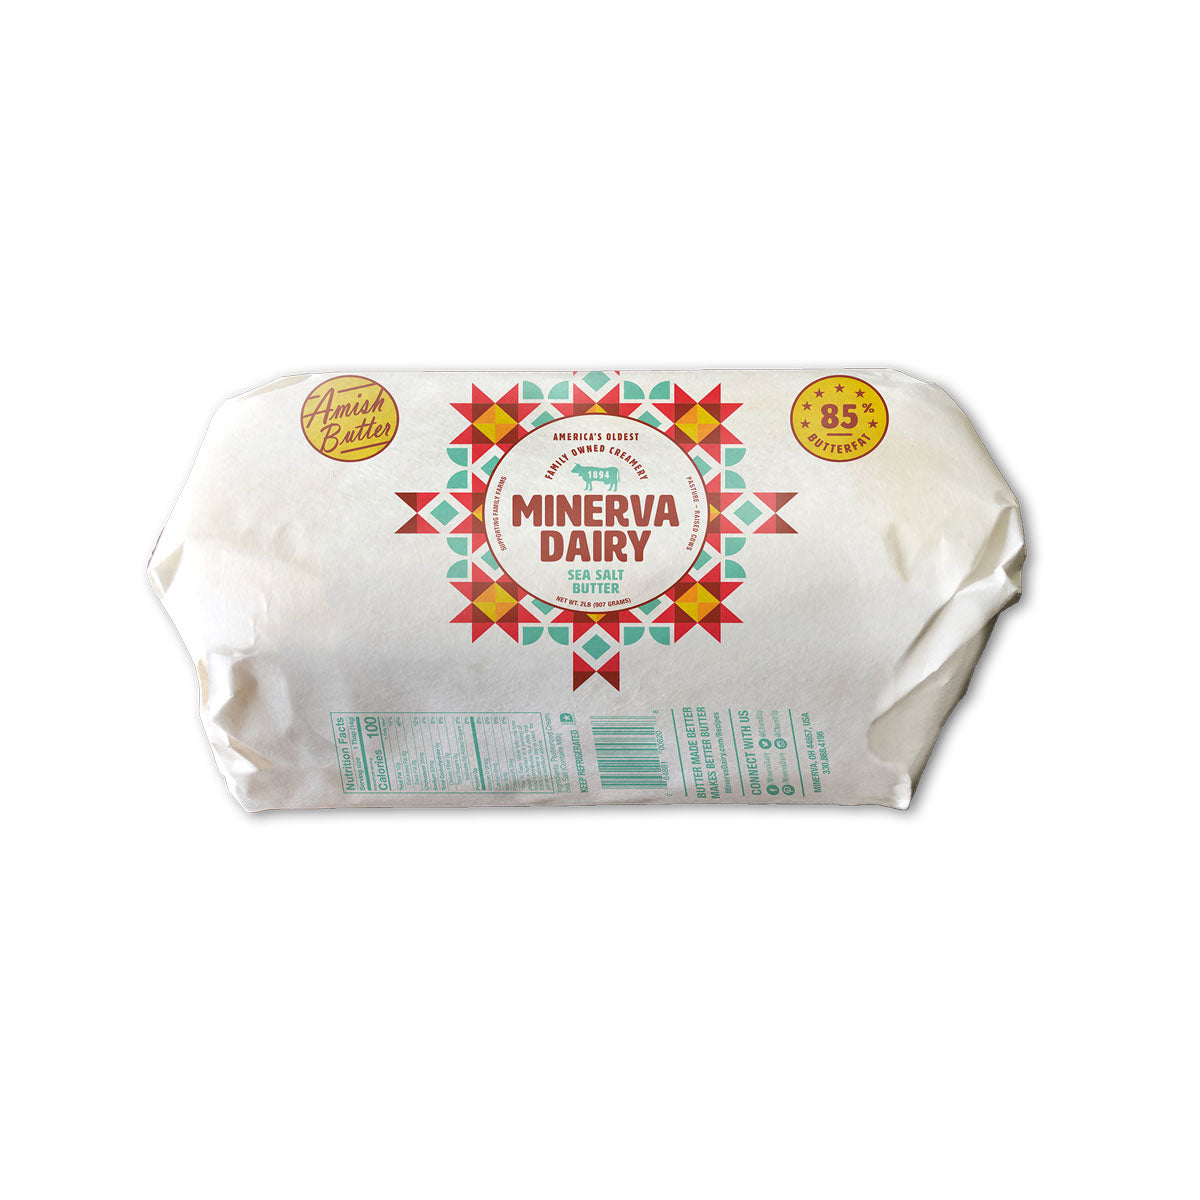 Minerva Dairy 85% Salted Butter 2 LB